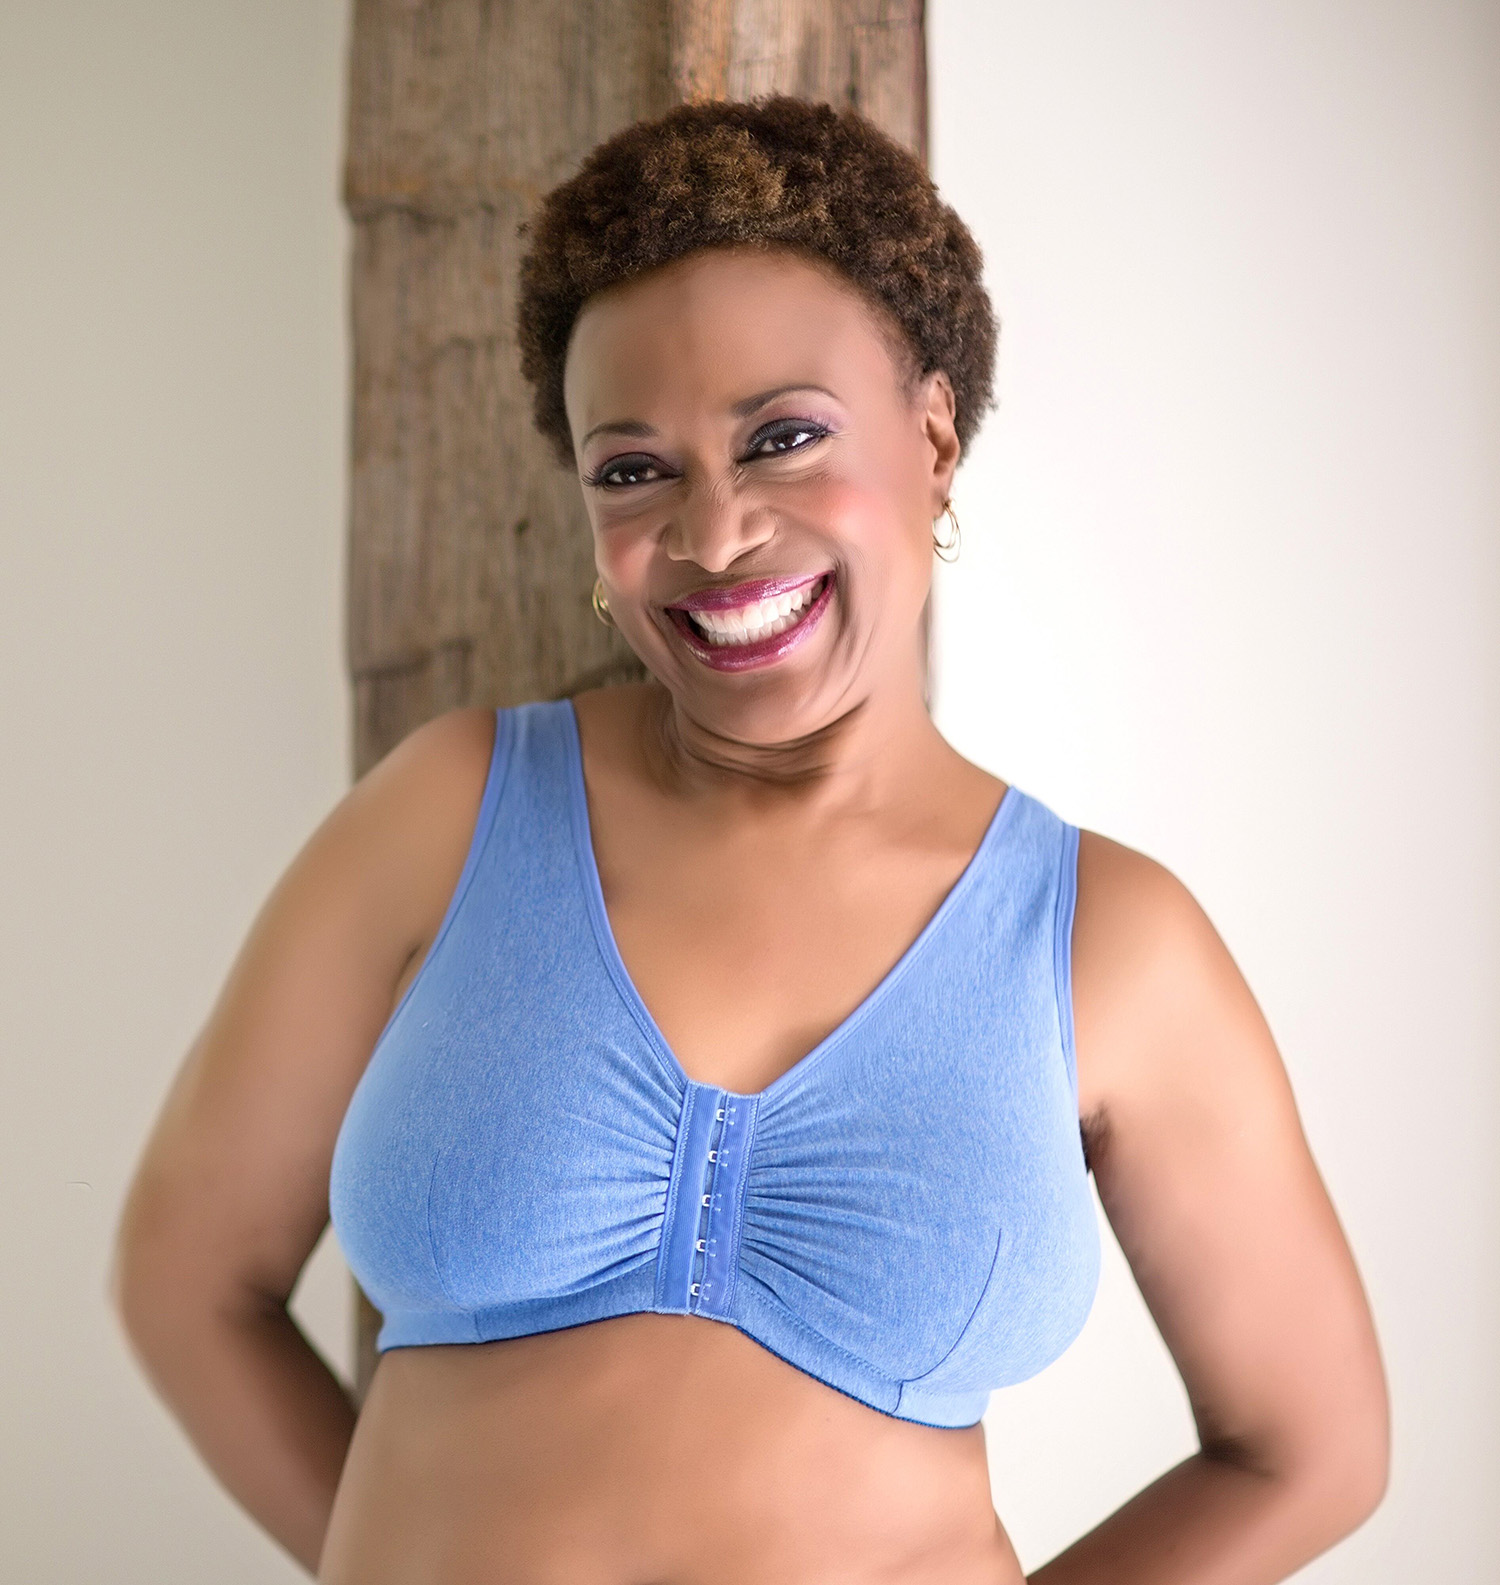 Mastectomy, Surgical Recovery Bras and Garments